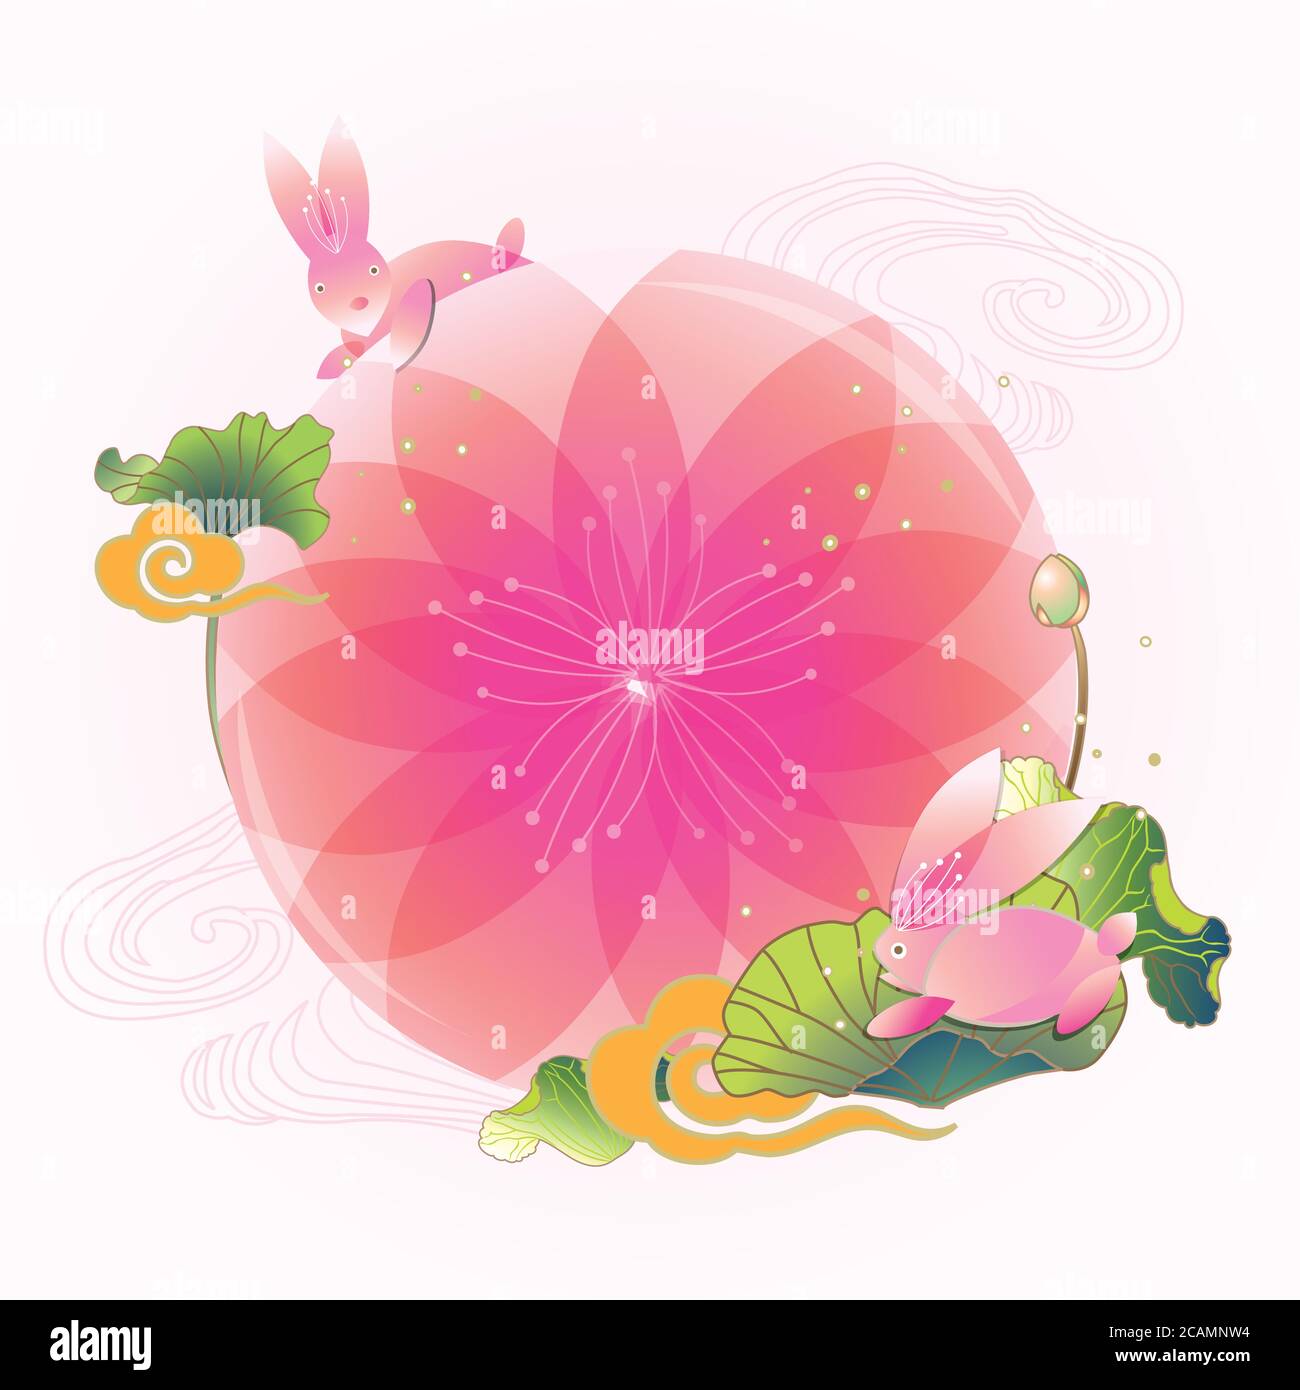 Masthead design for Mid autumn festival design. Its a autumn harvest festival celebrated by Chinese. Stock Vector